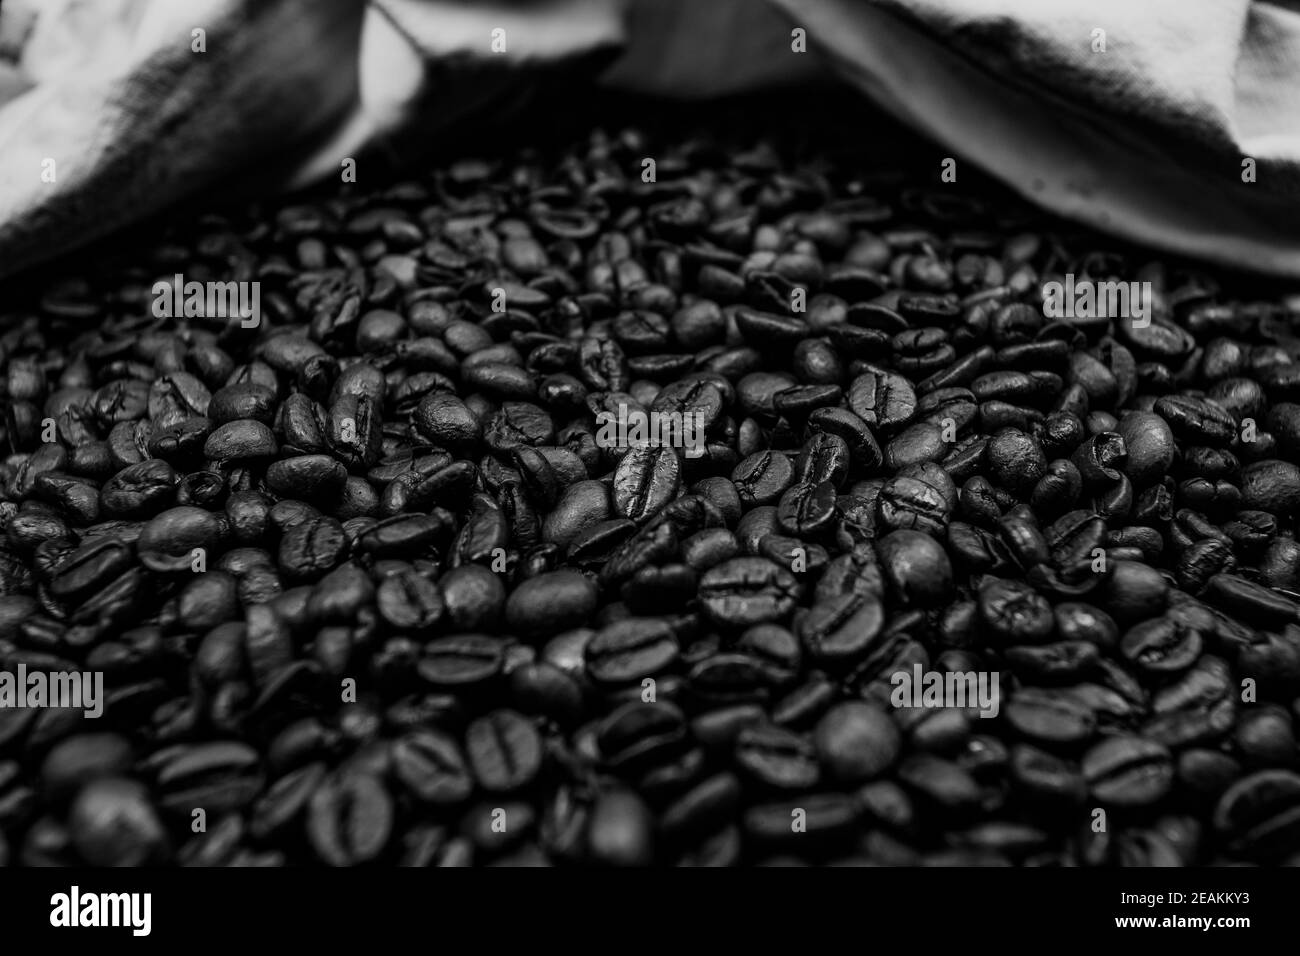 A black and white close up of a lot of coffee grain Stock Photo